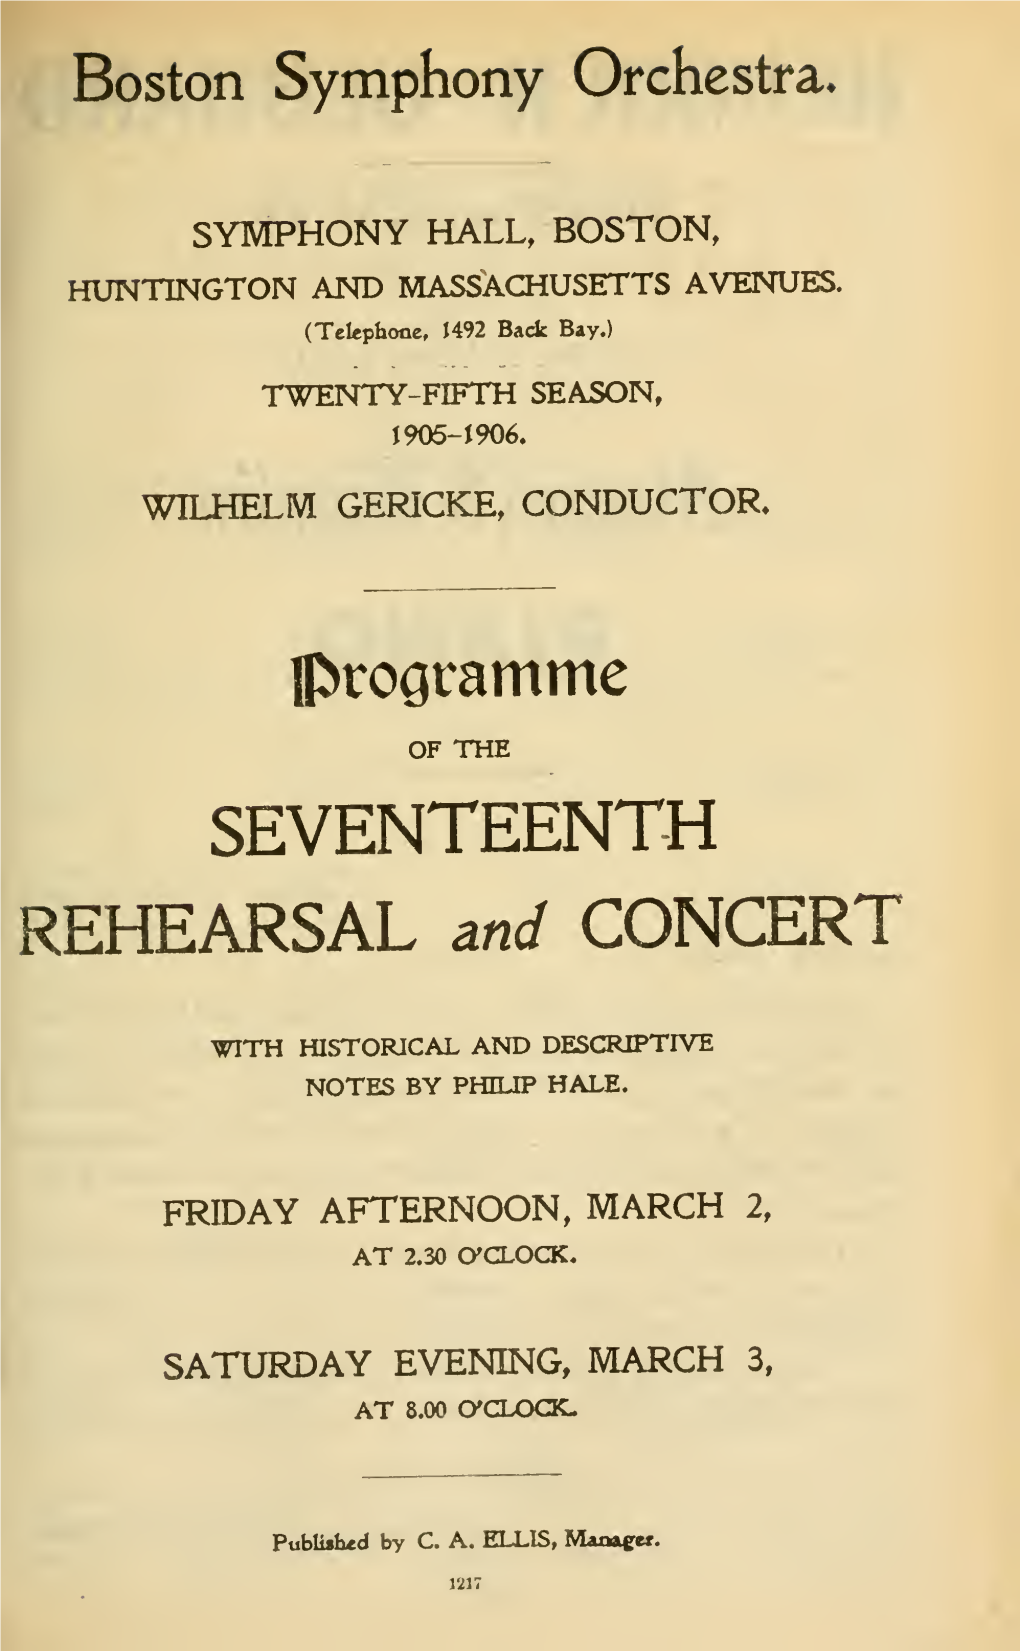 SEVENTEENTH REHEARSAL and CONCERT